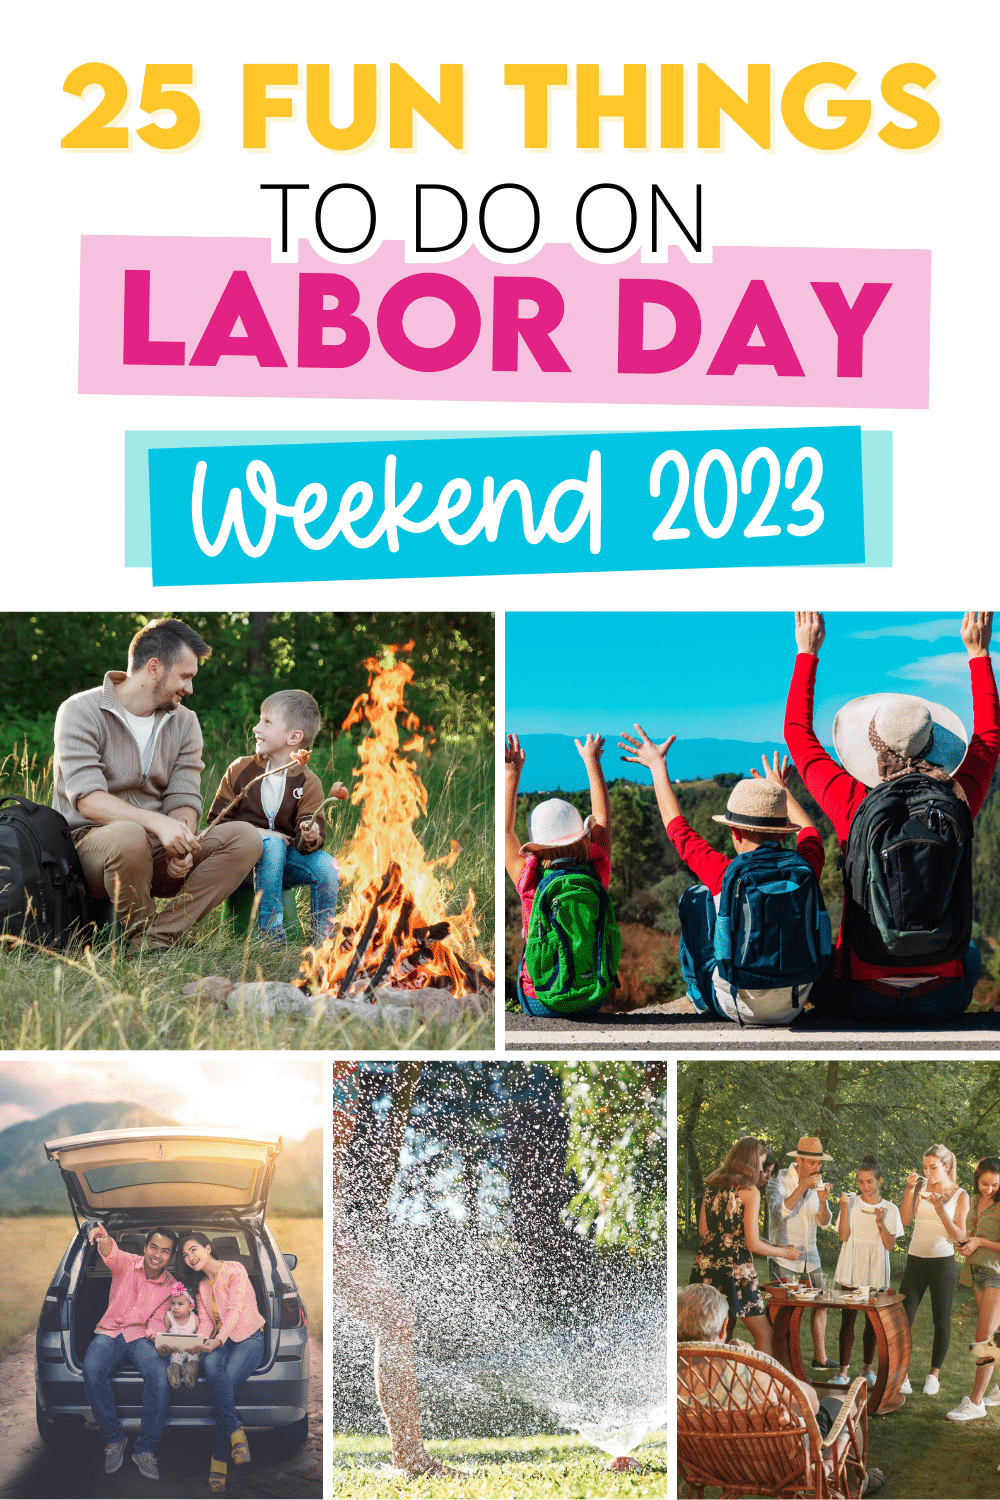 Check out this fun list of things to do on Labor Day weekend 2023! | The Dating Divas